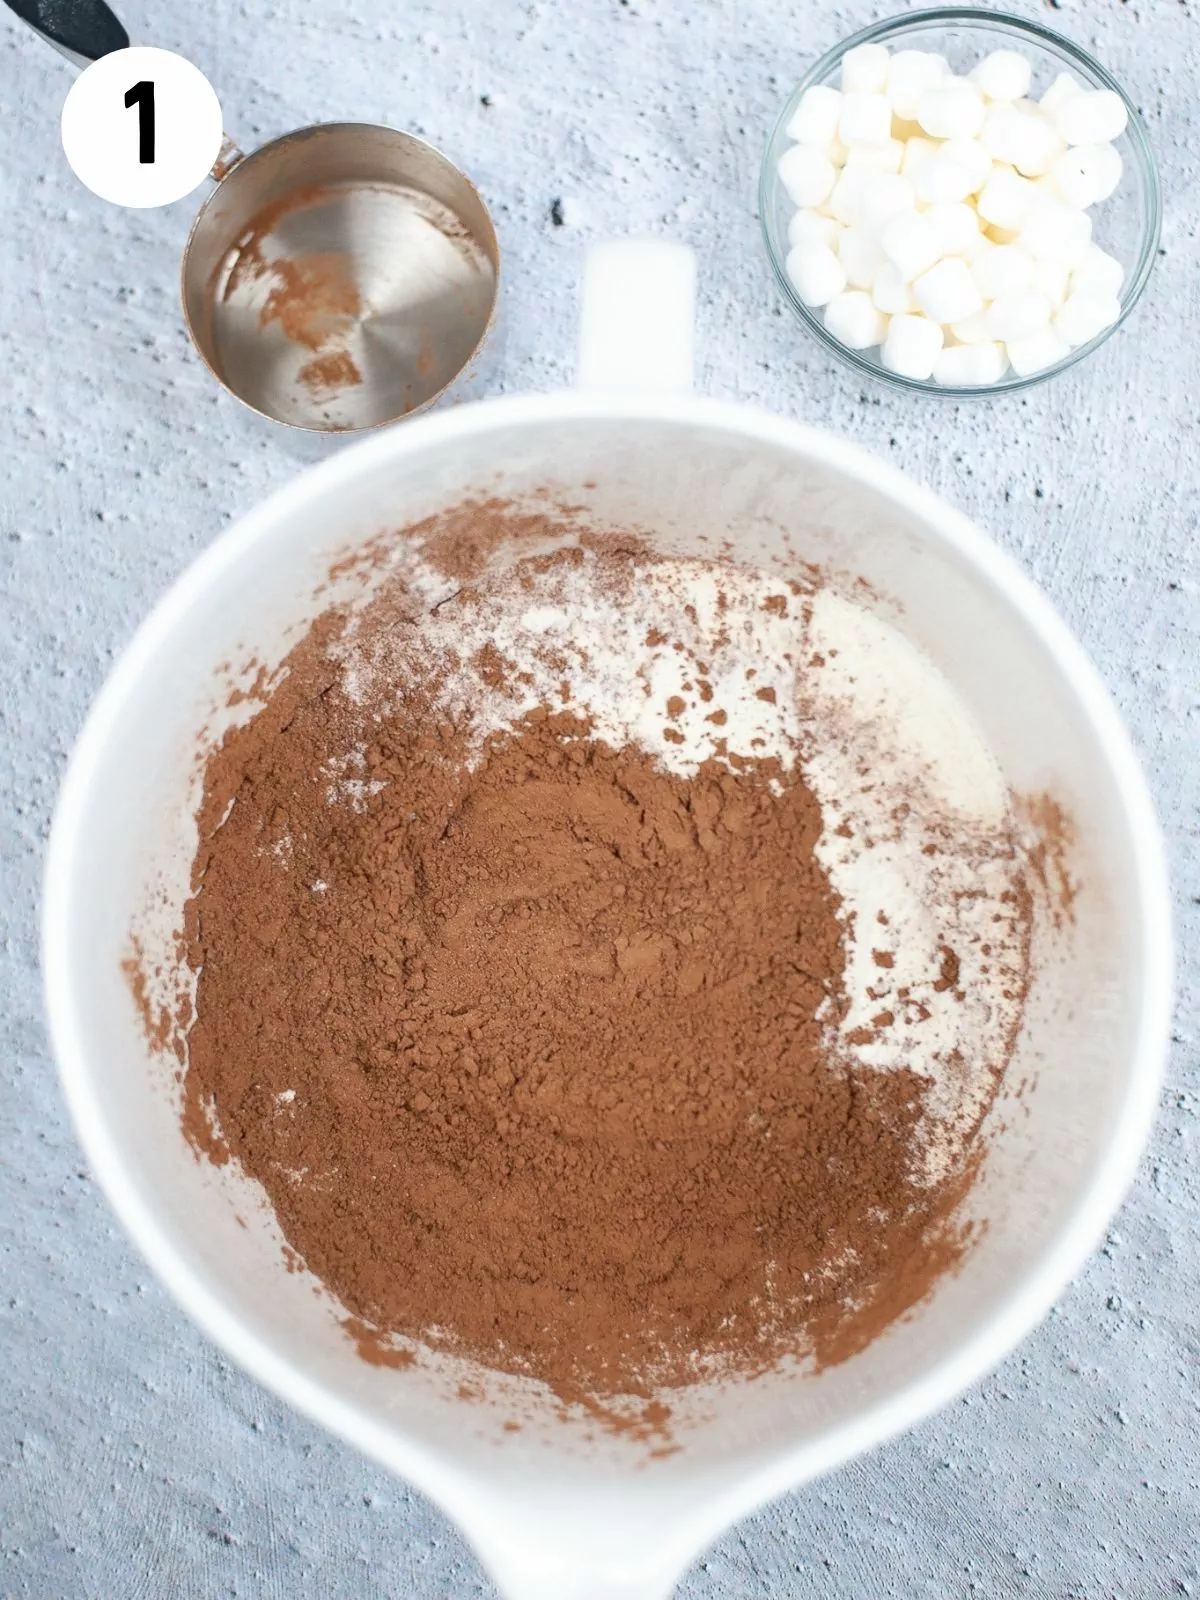 add hot cocoa ingredients together in bowl.